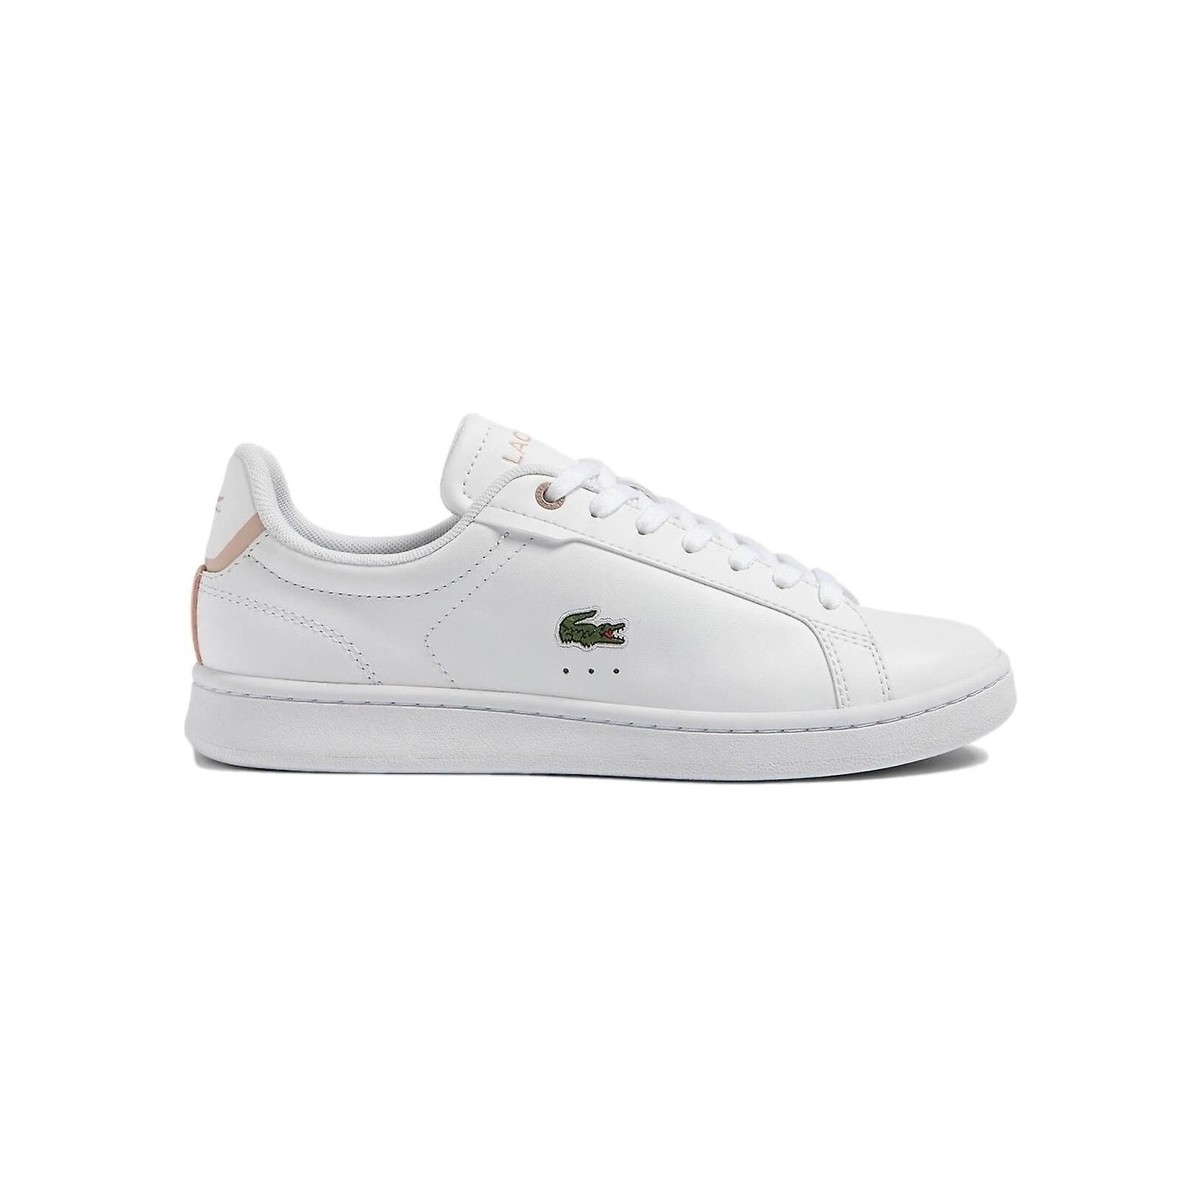 Scarpe Donna Sneakers Lacoste Carnaby Pro - White Light Pink Bianco